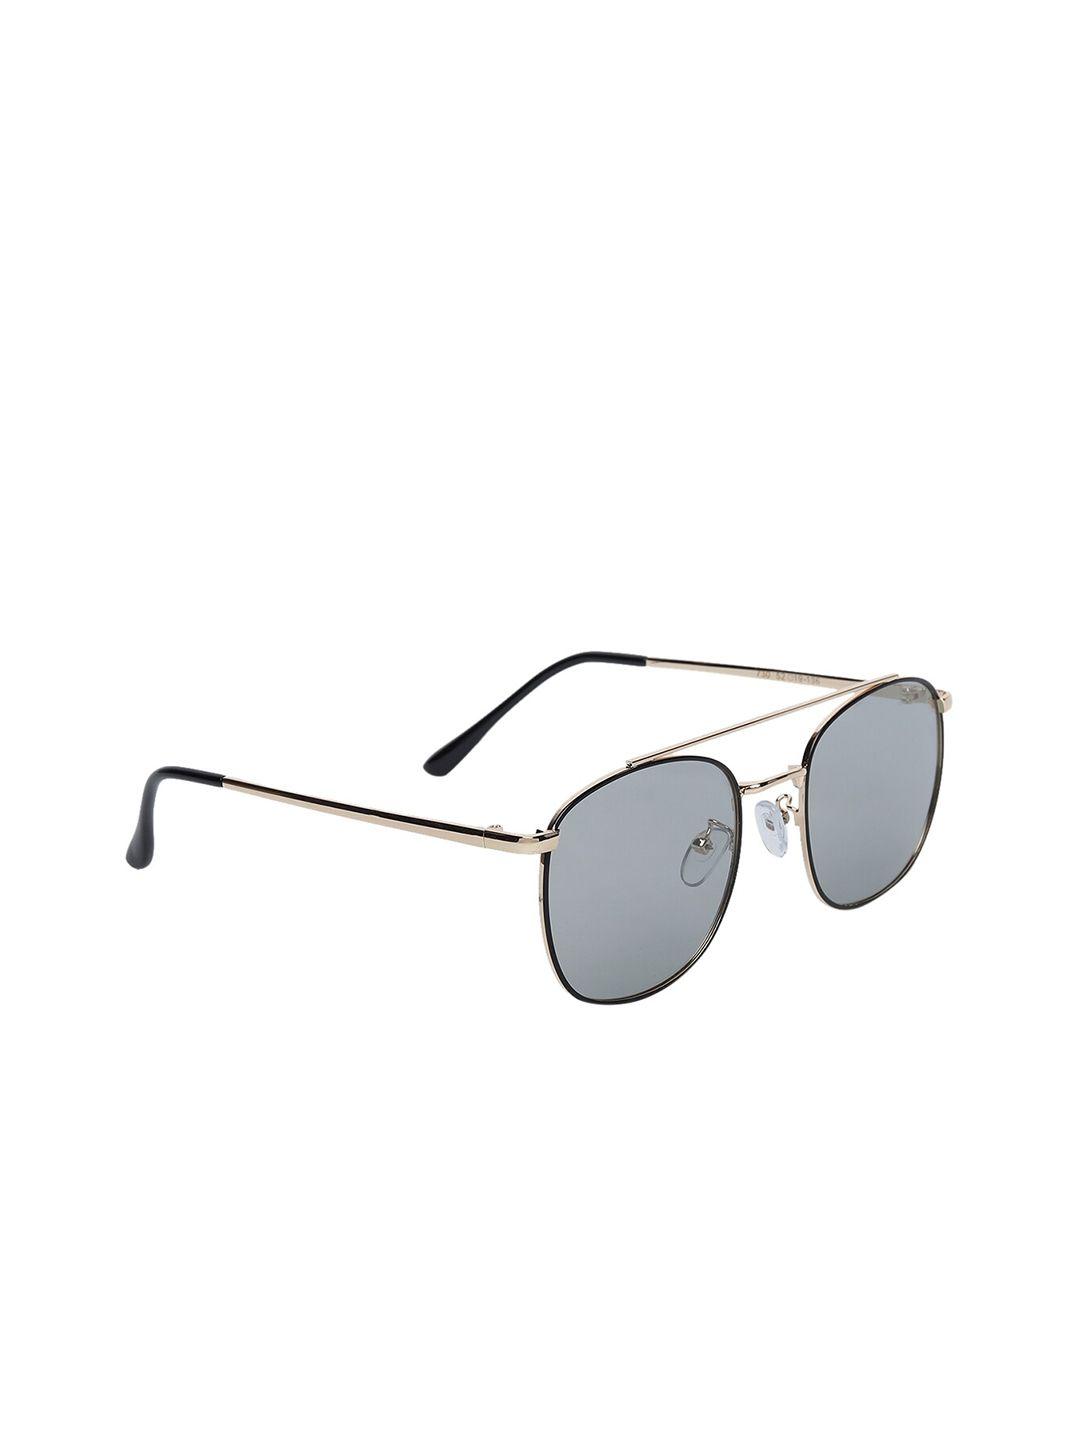 peter jones eyewear unisex grey lens & gold-toned square sunglasses with uv protected lens